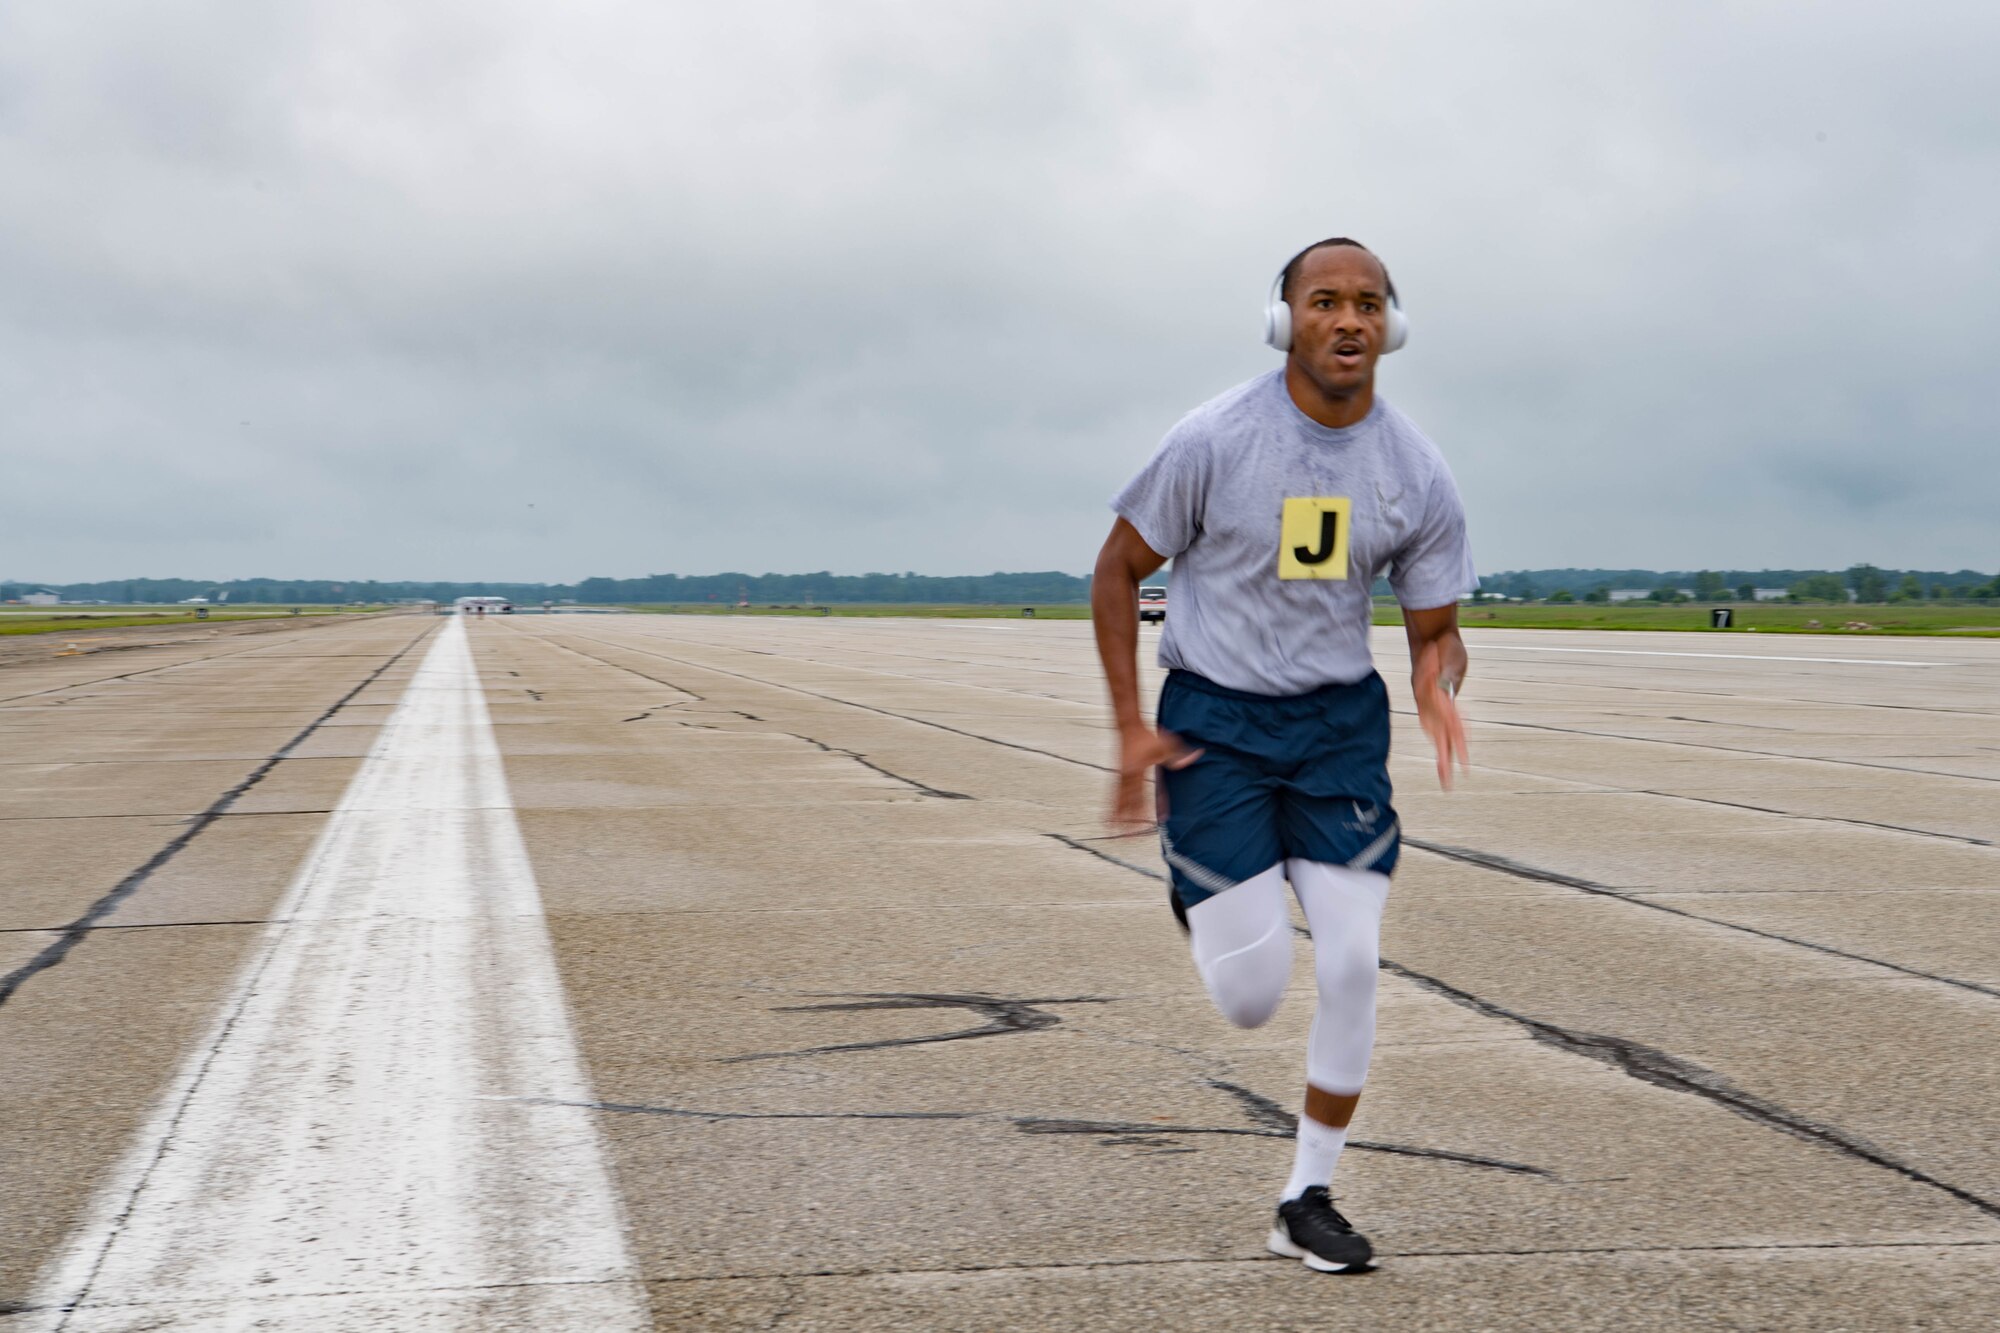 Senior Airman Christopher Simpson, 434th Force Support Squadron personnelist, runs on the flightline at Grissom Air Reserve Base, Indiana, July 11, 2021. Grissom began fitness assessments this month for the first time since the COVID-19 pandemic. (U.S. Air Force photo by Staff Sgt. Jeremy Blocker)